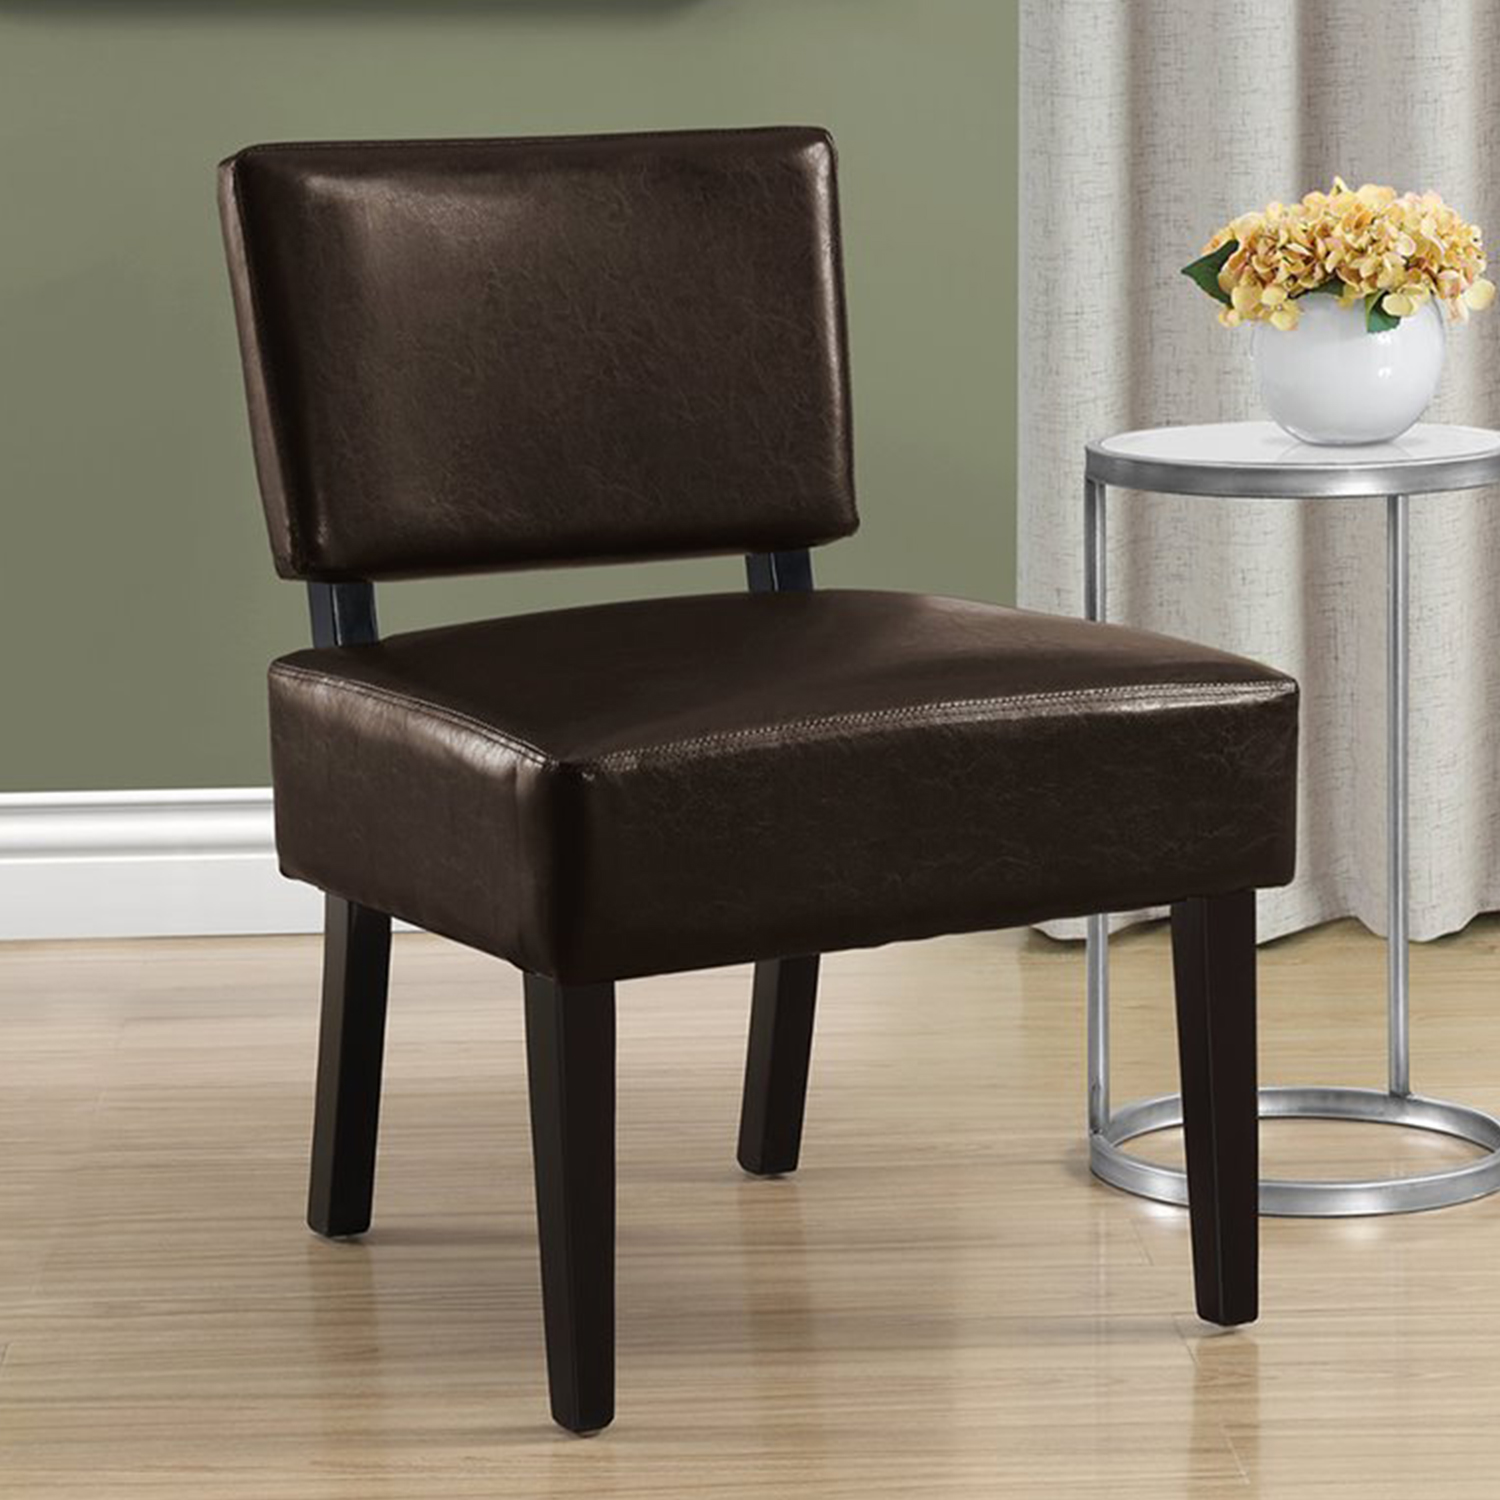 27.5" x 22.75" x 31.5" Brown Leather-Look Foam Accent Chair with Solid Wood Frame